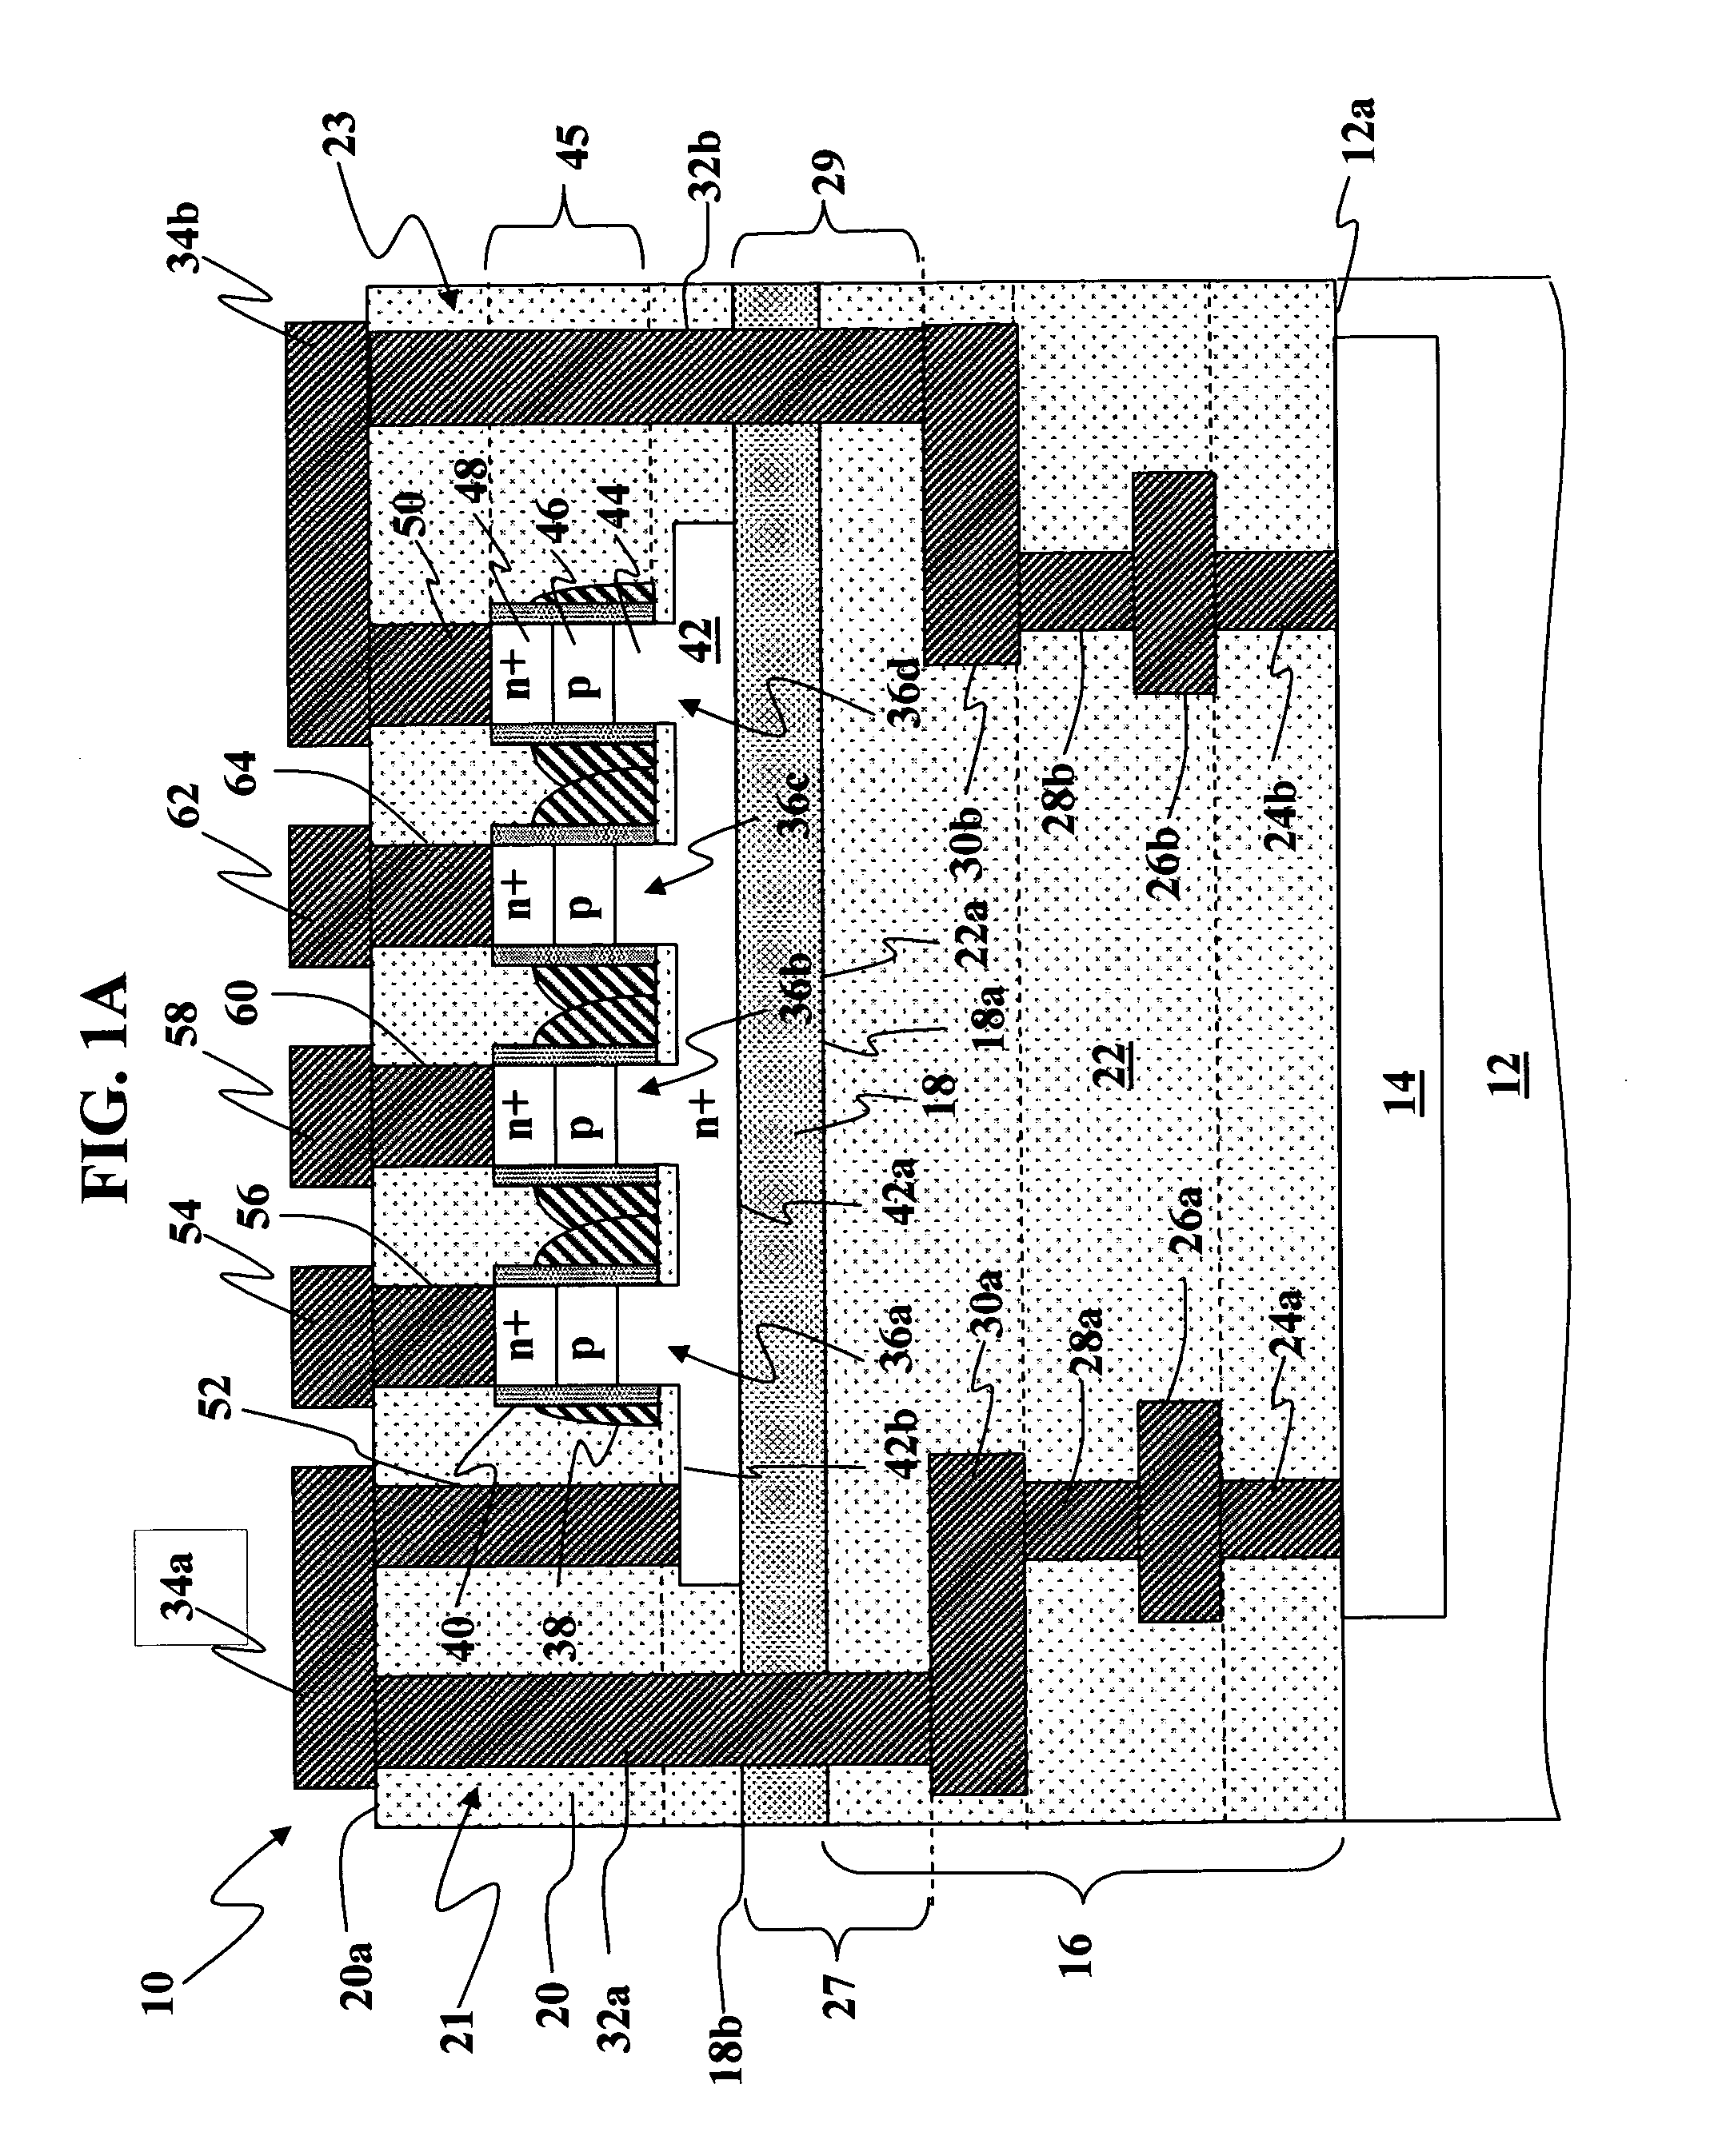 Semiconductor device with base support structure